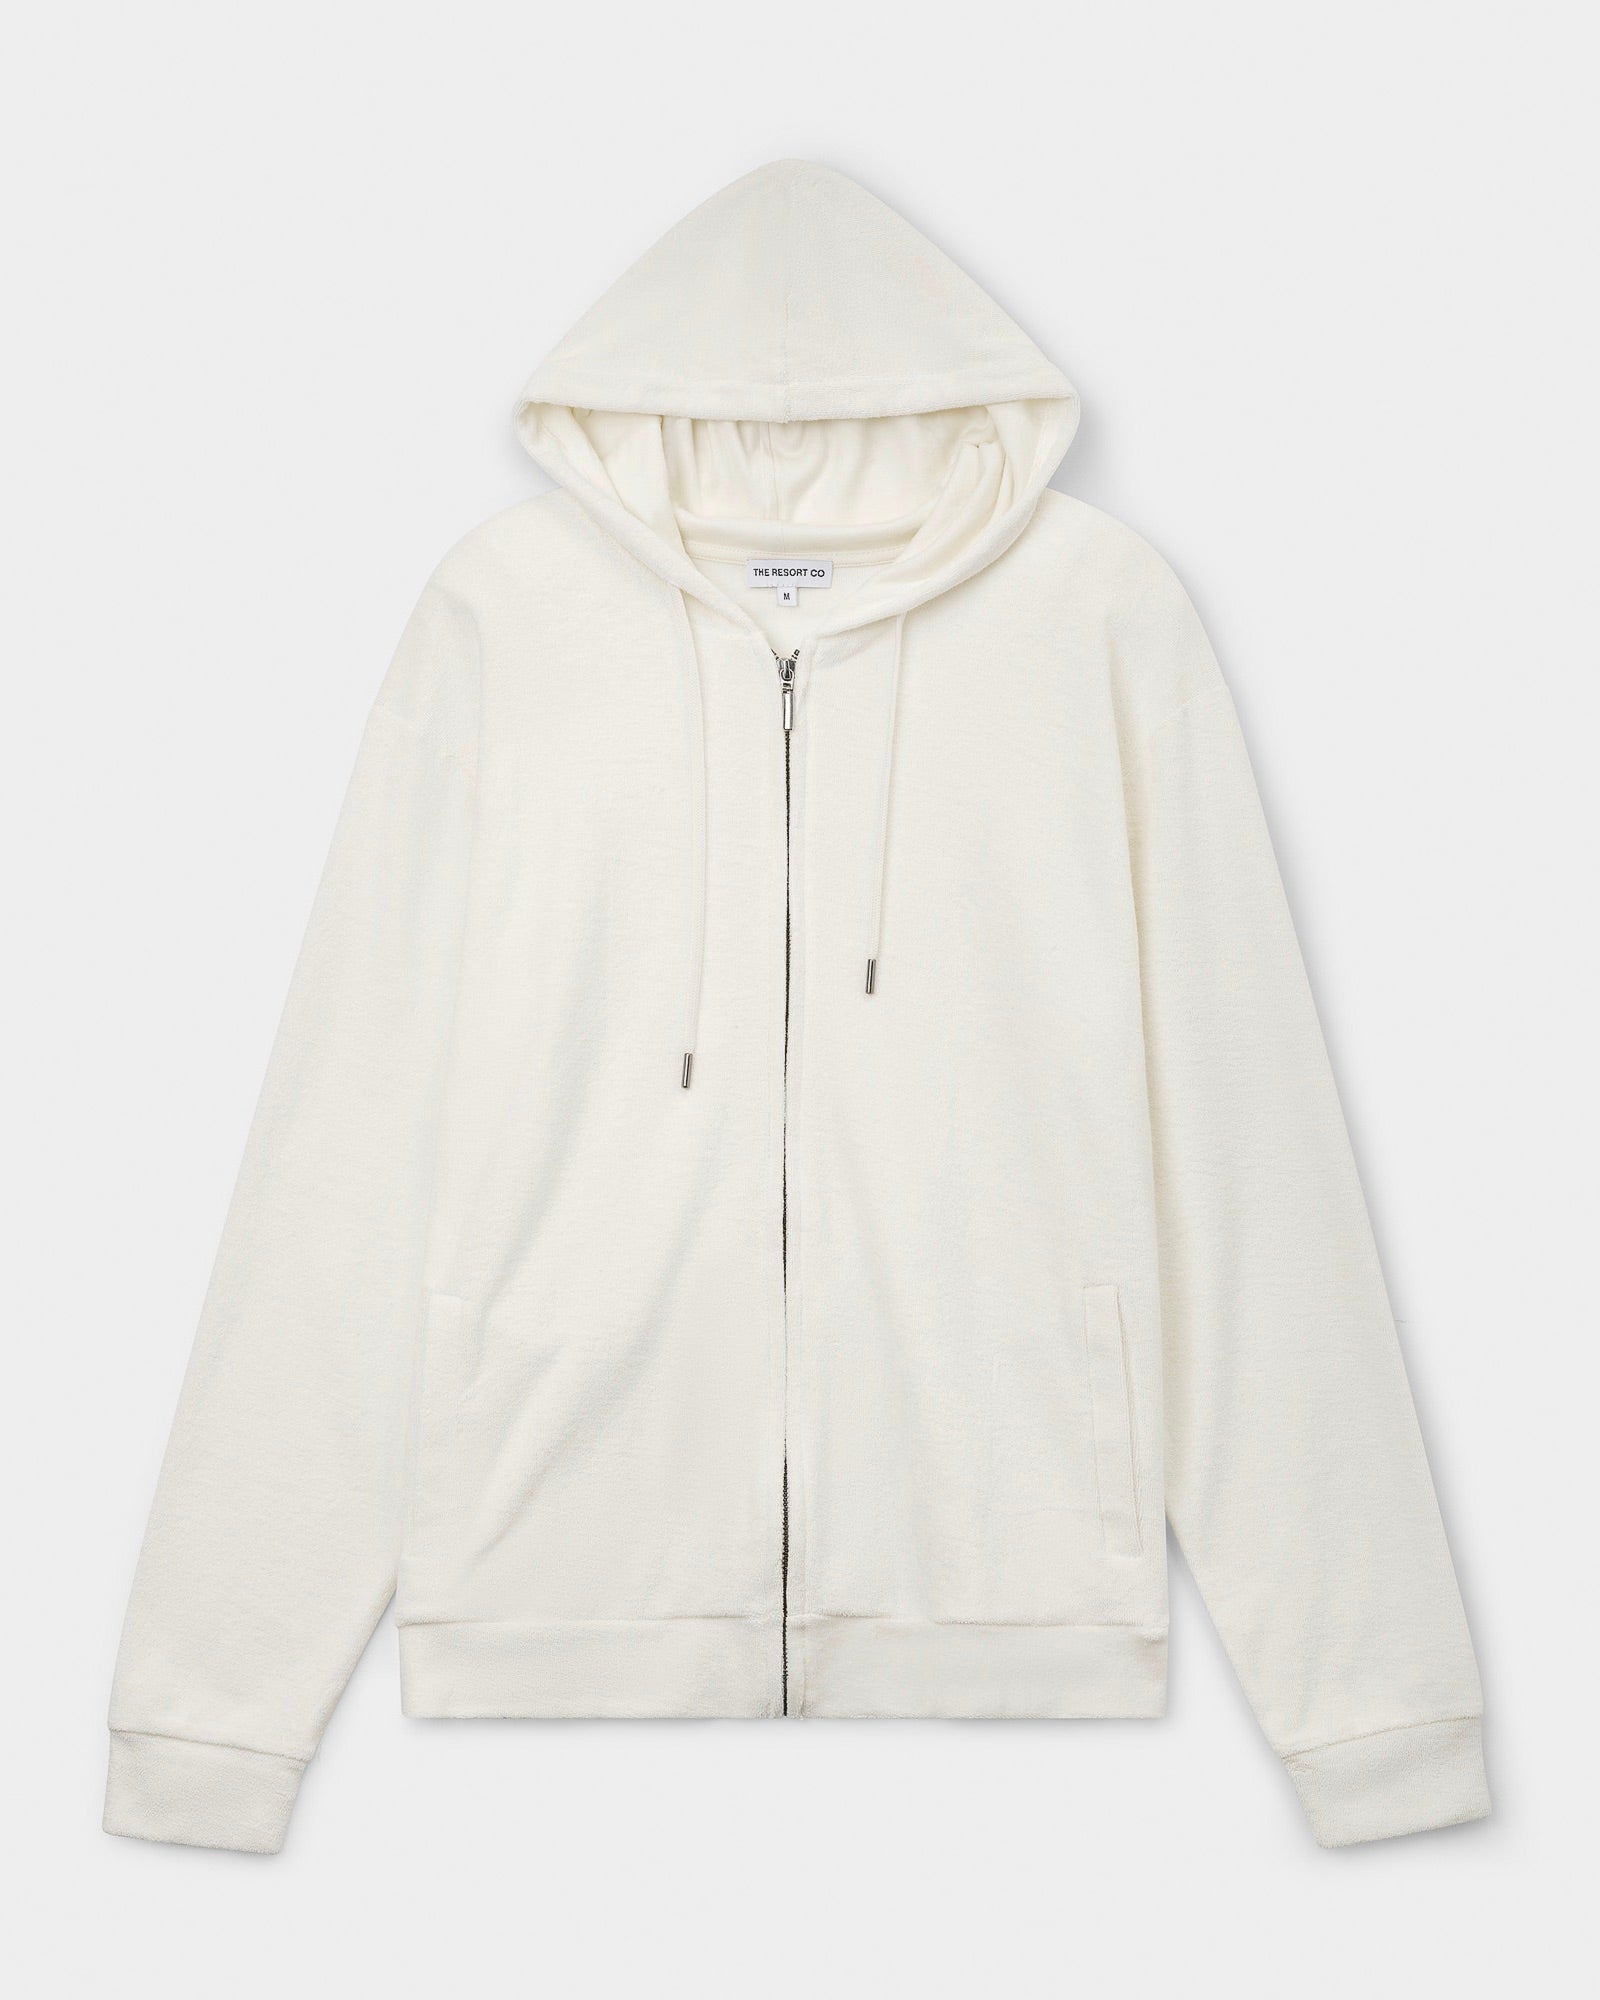 Terry Lounge Hoodie White - THE RESORT CO